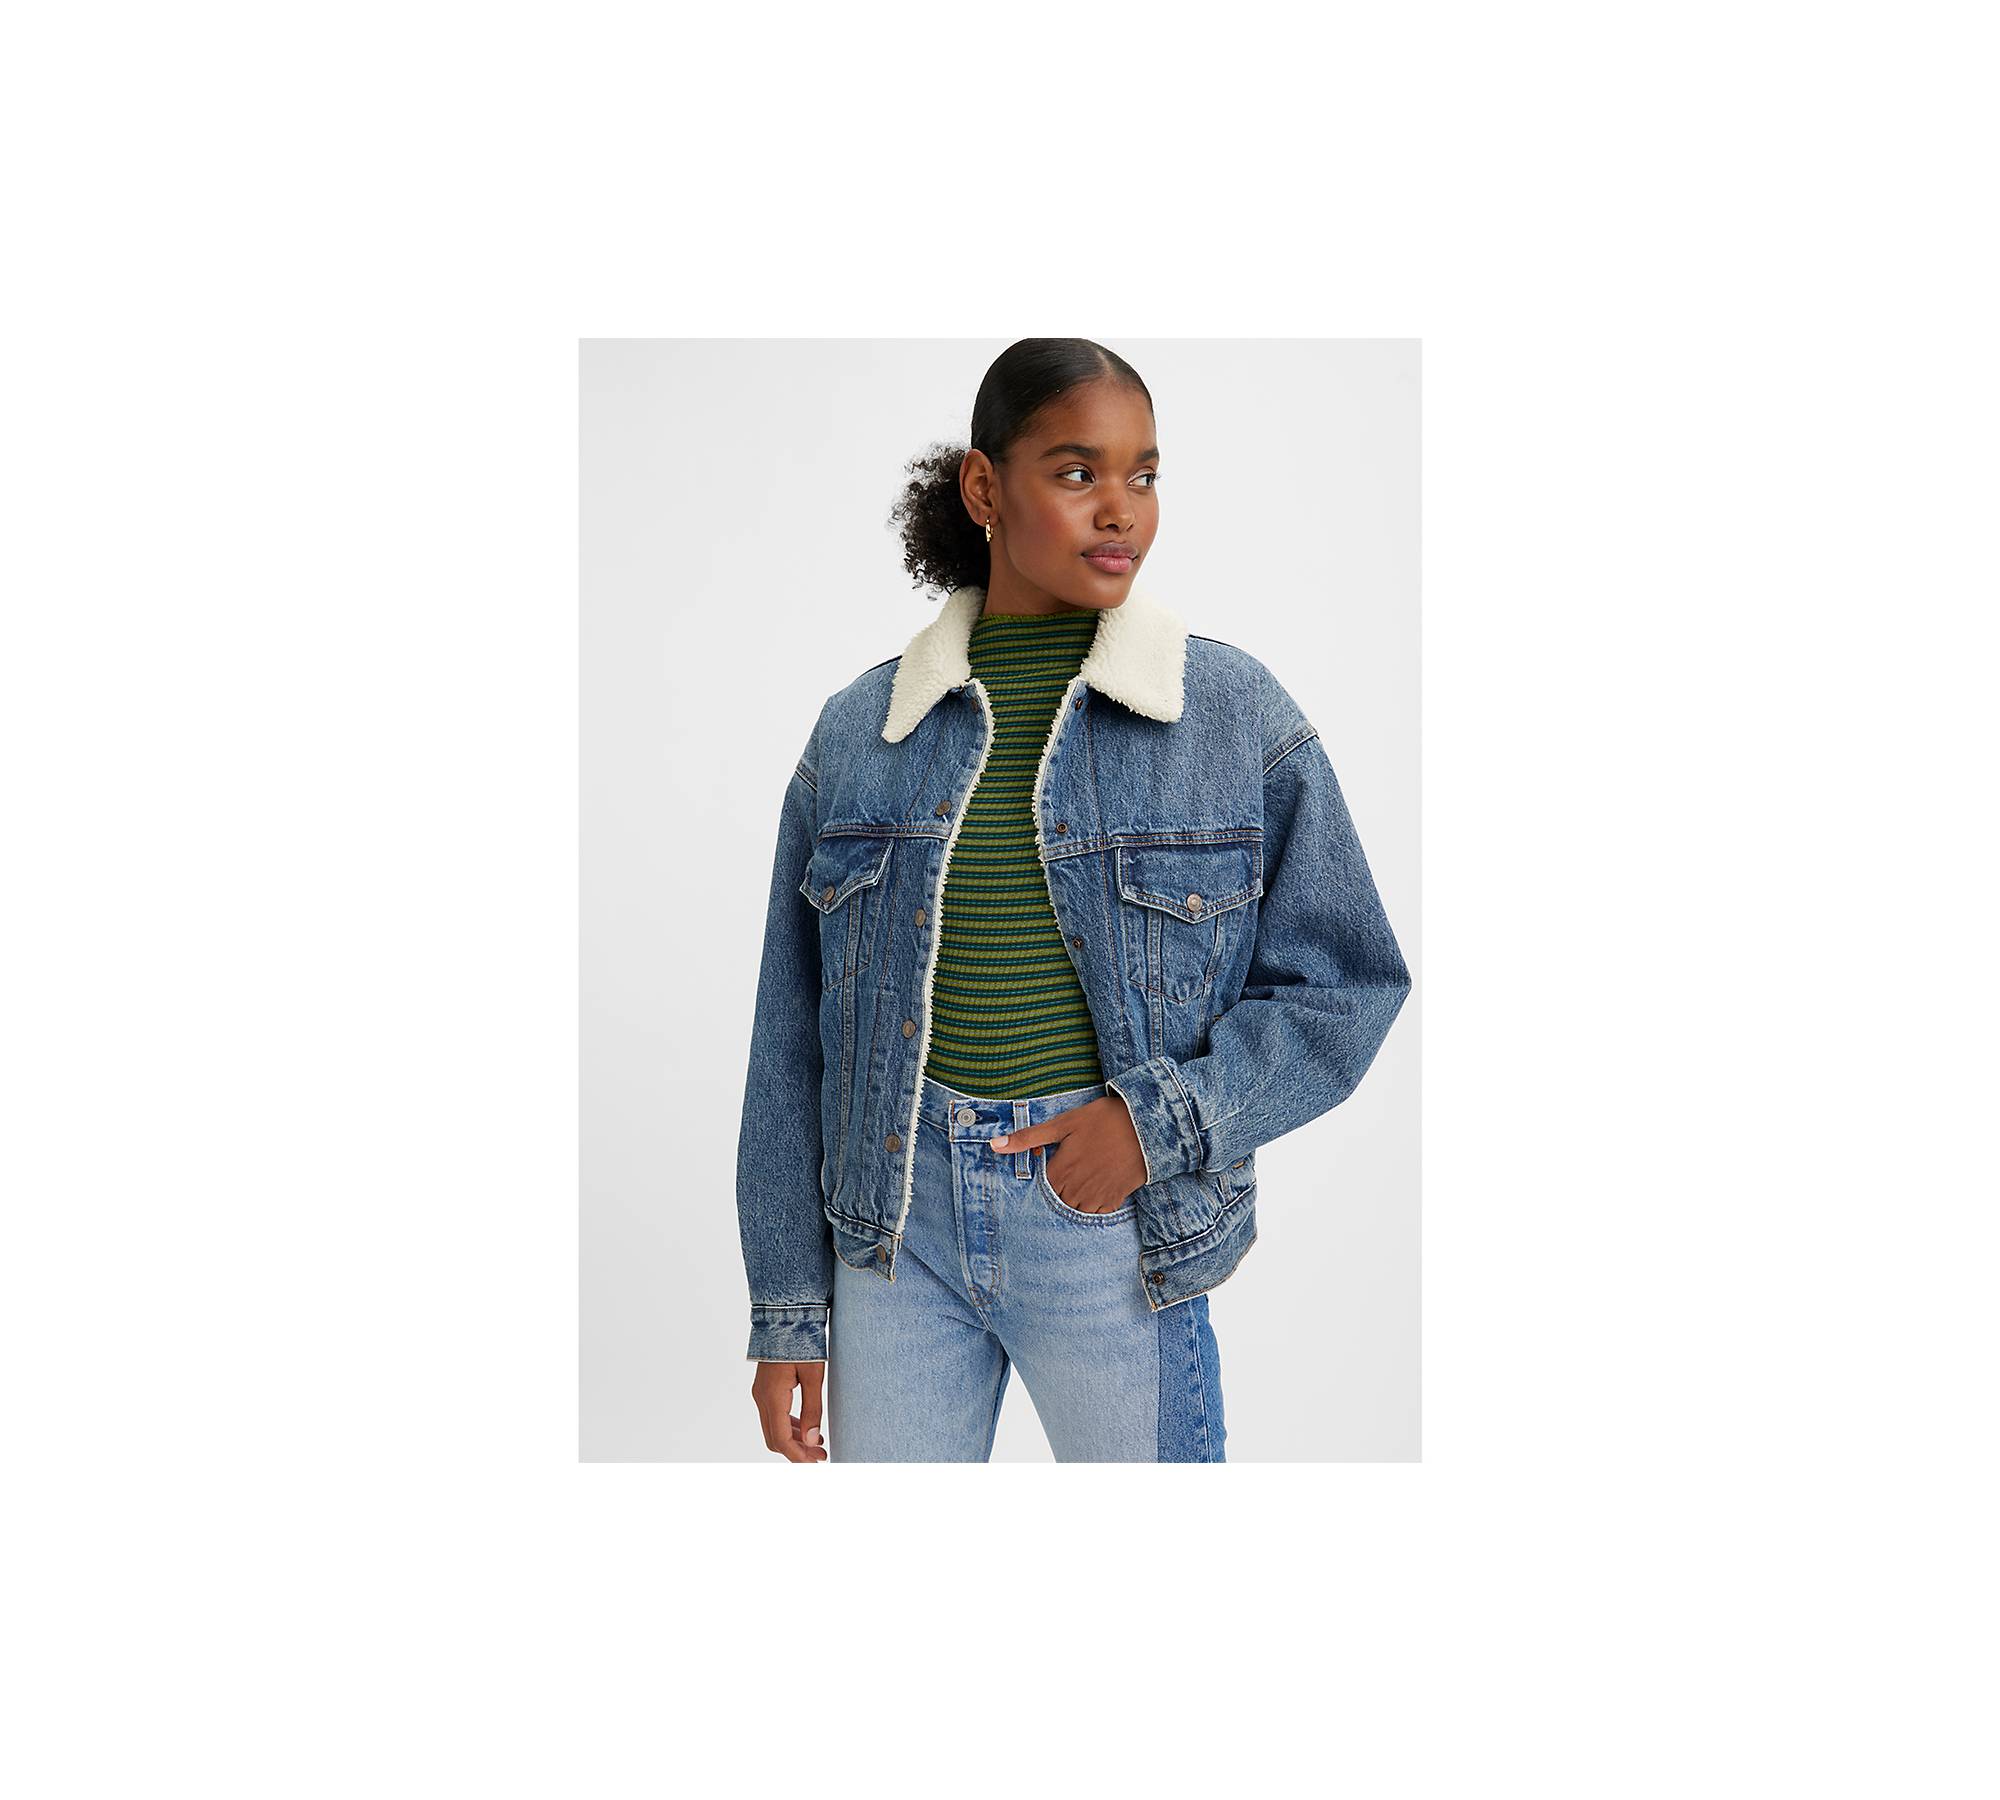 90s Trucker Jacket by Levi's Online, THE ICONIC